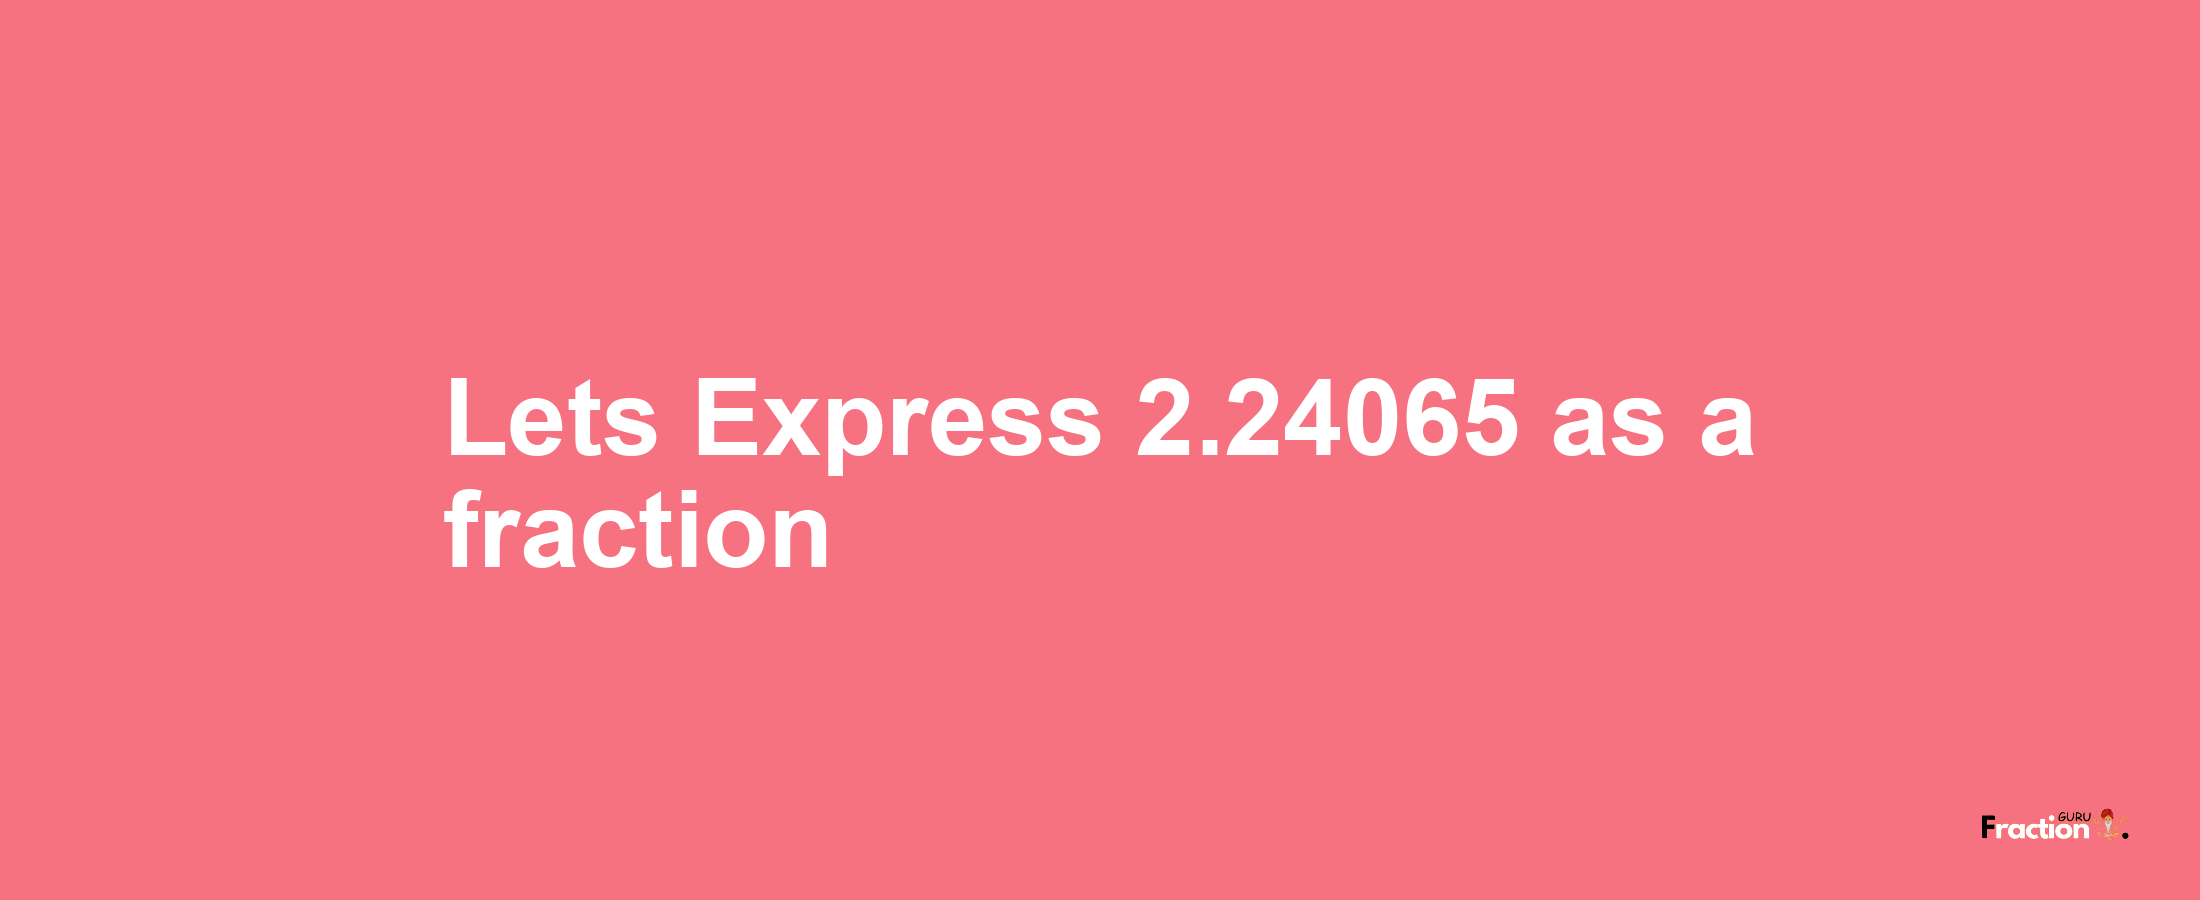 Lets Express 2.24065 as afraction